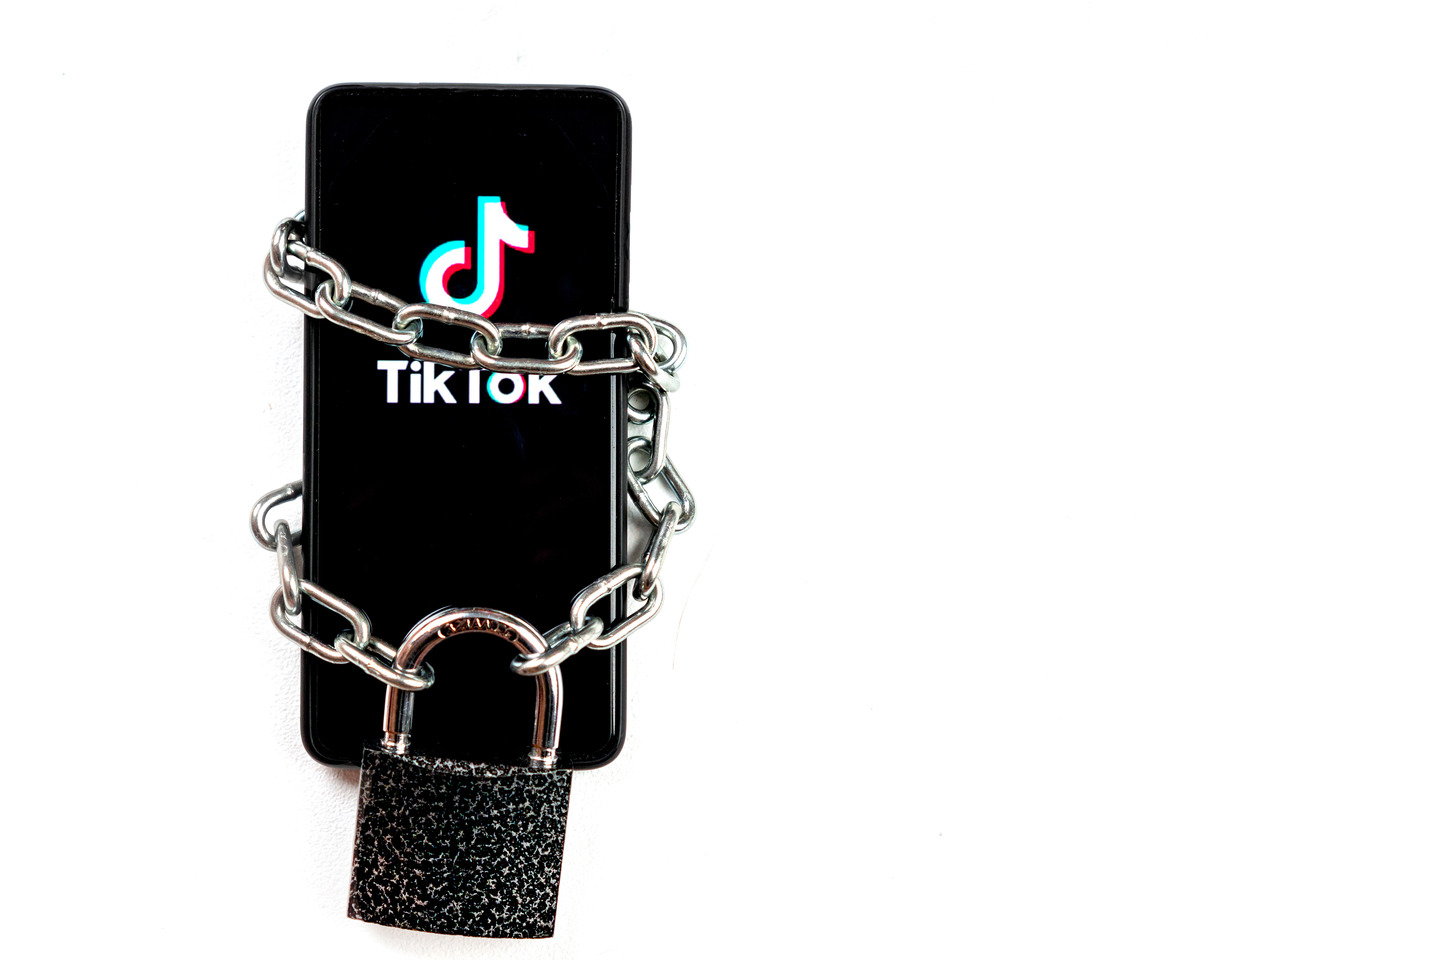 TikTok - more responsible than it's given credit for?